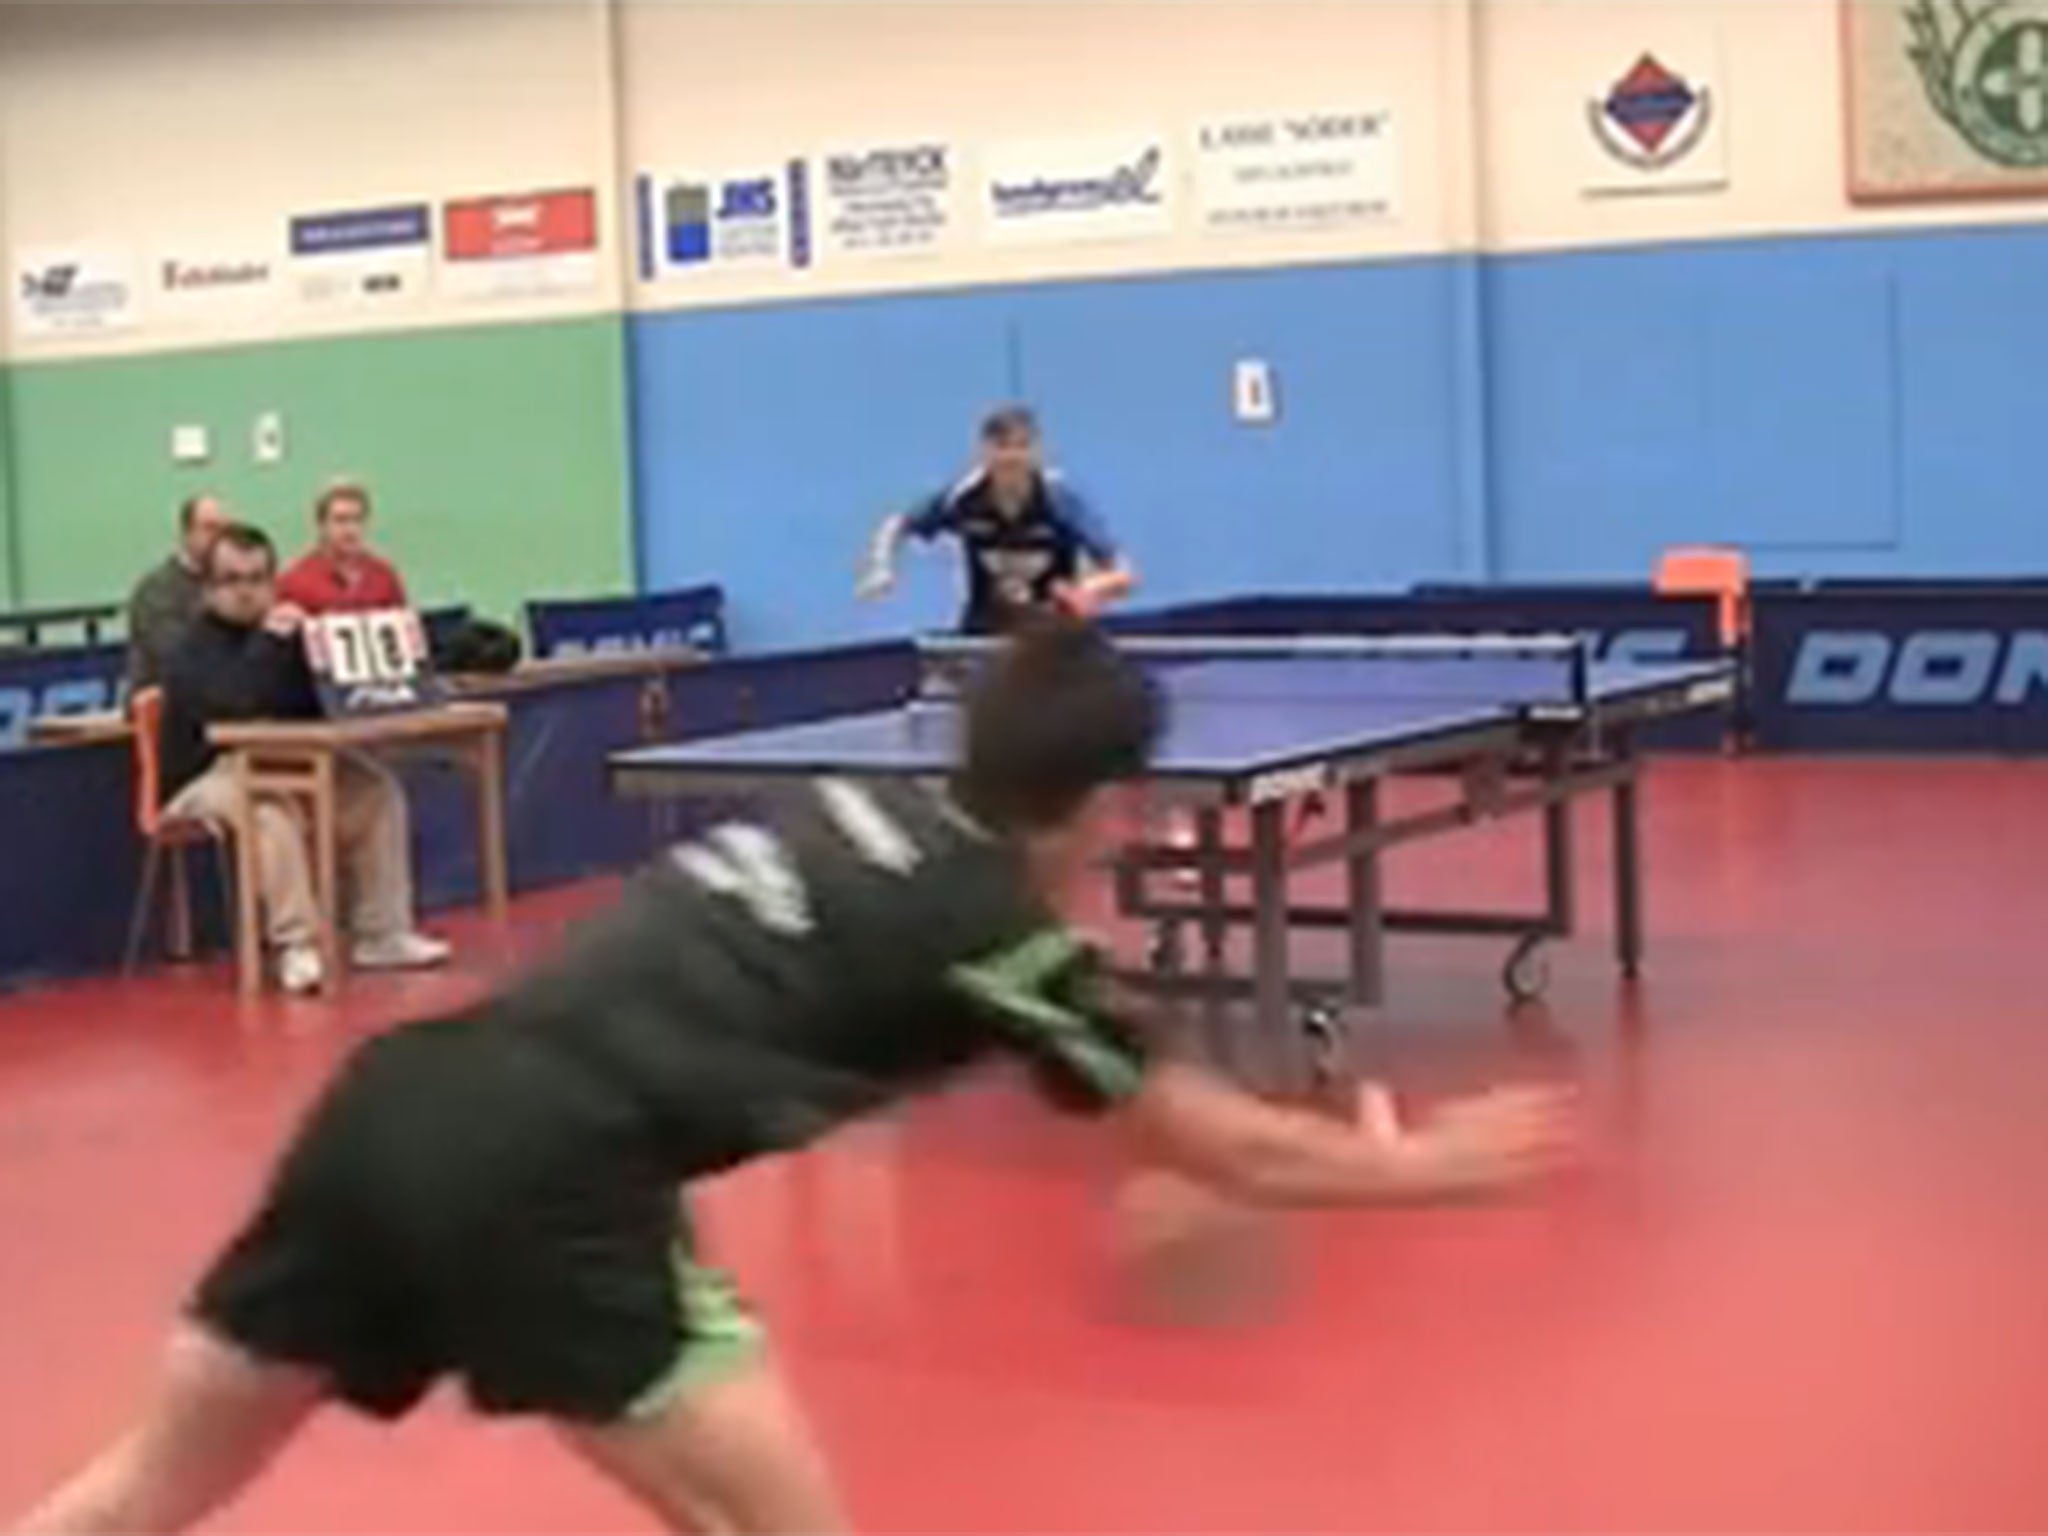 Video Watch an amazing table tennis backhand shot The Independent The Independent